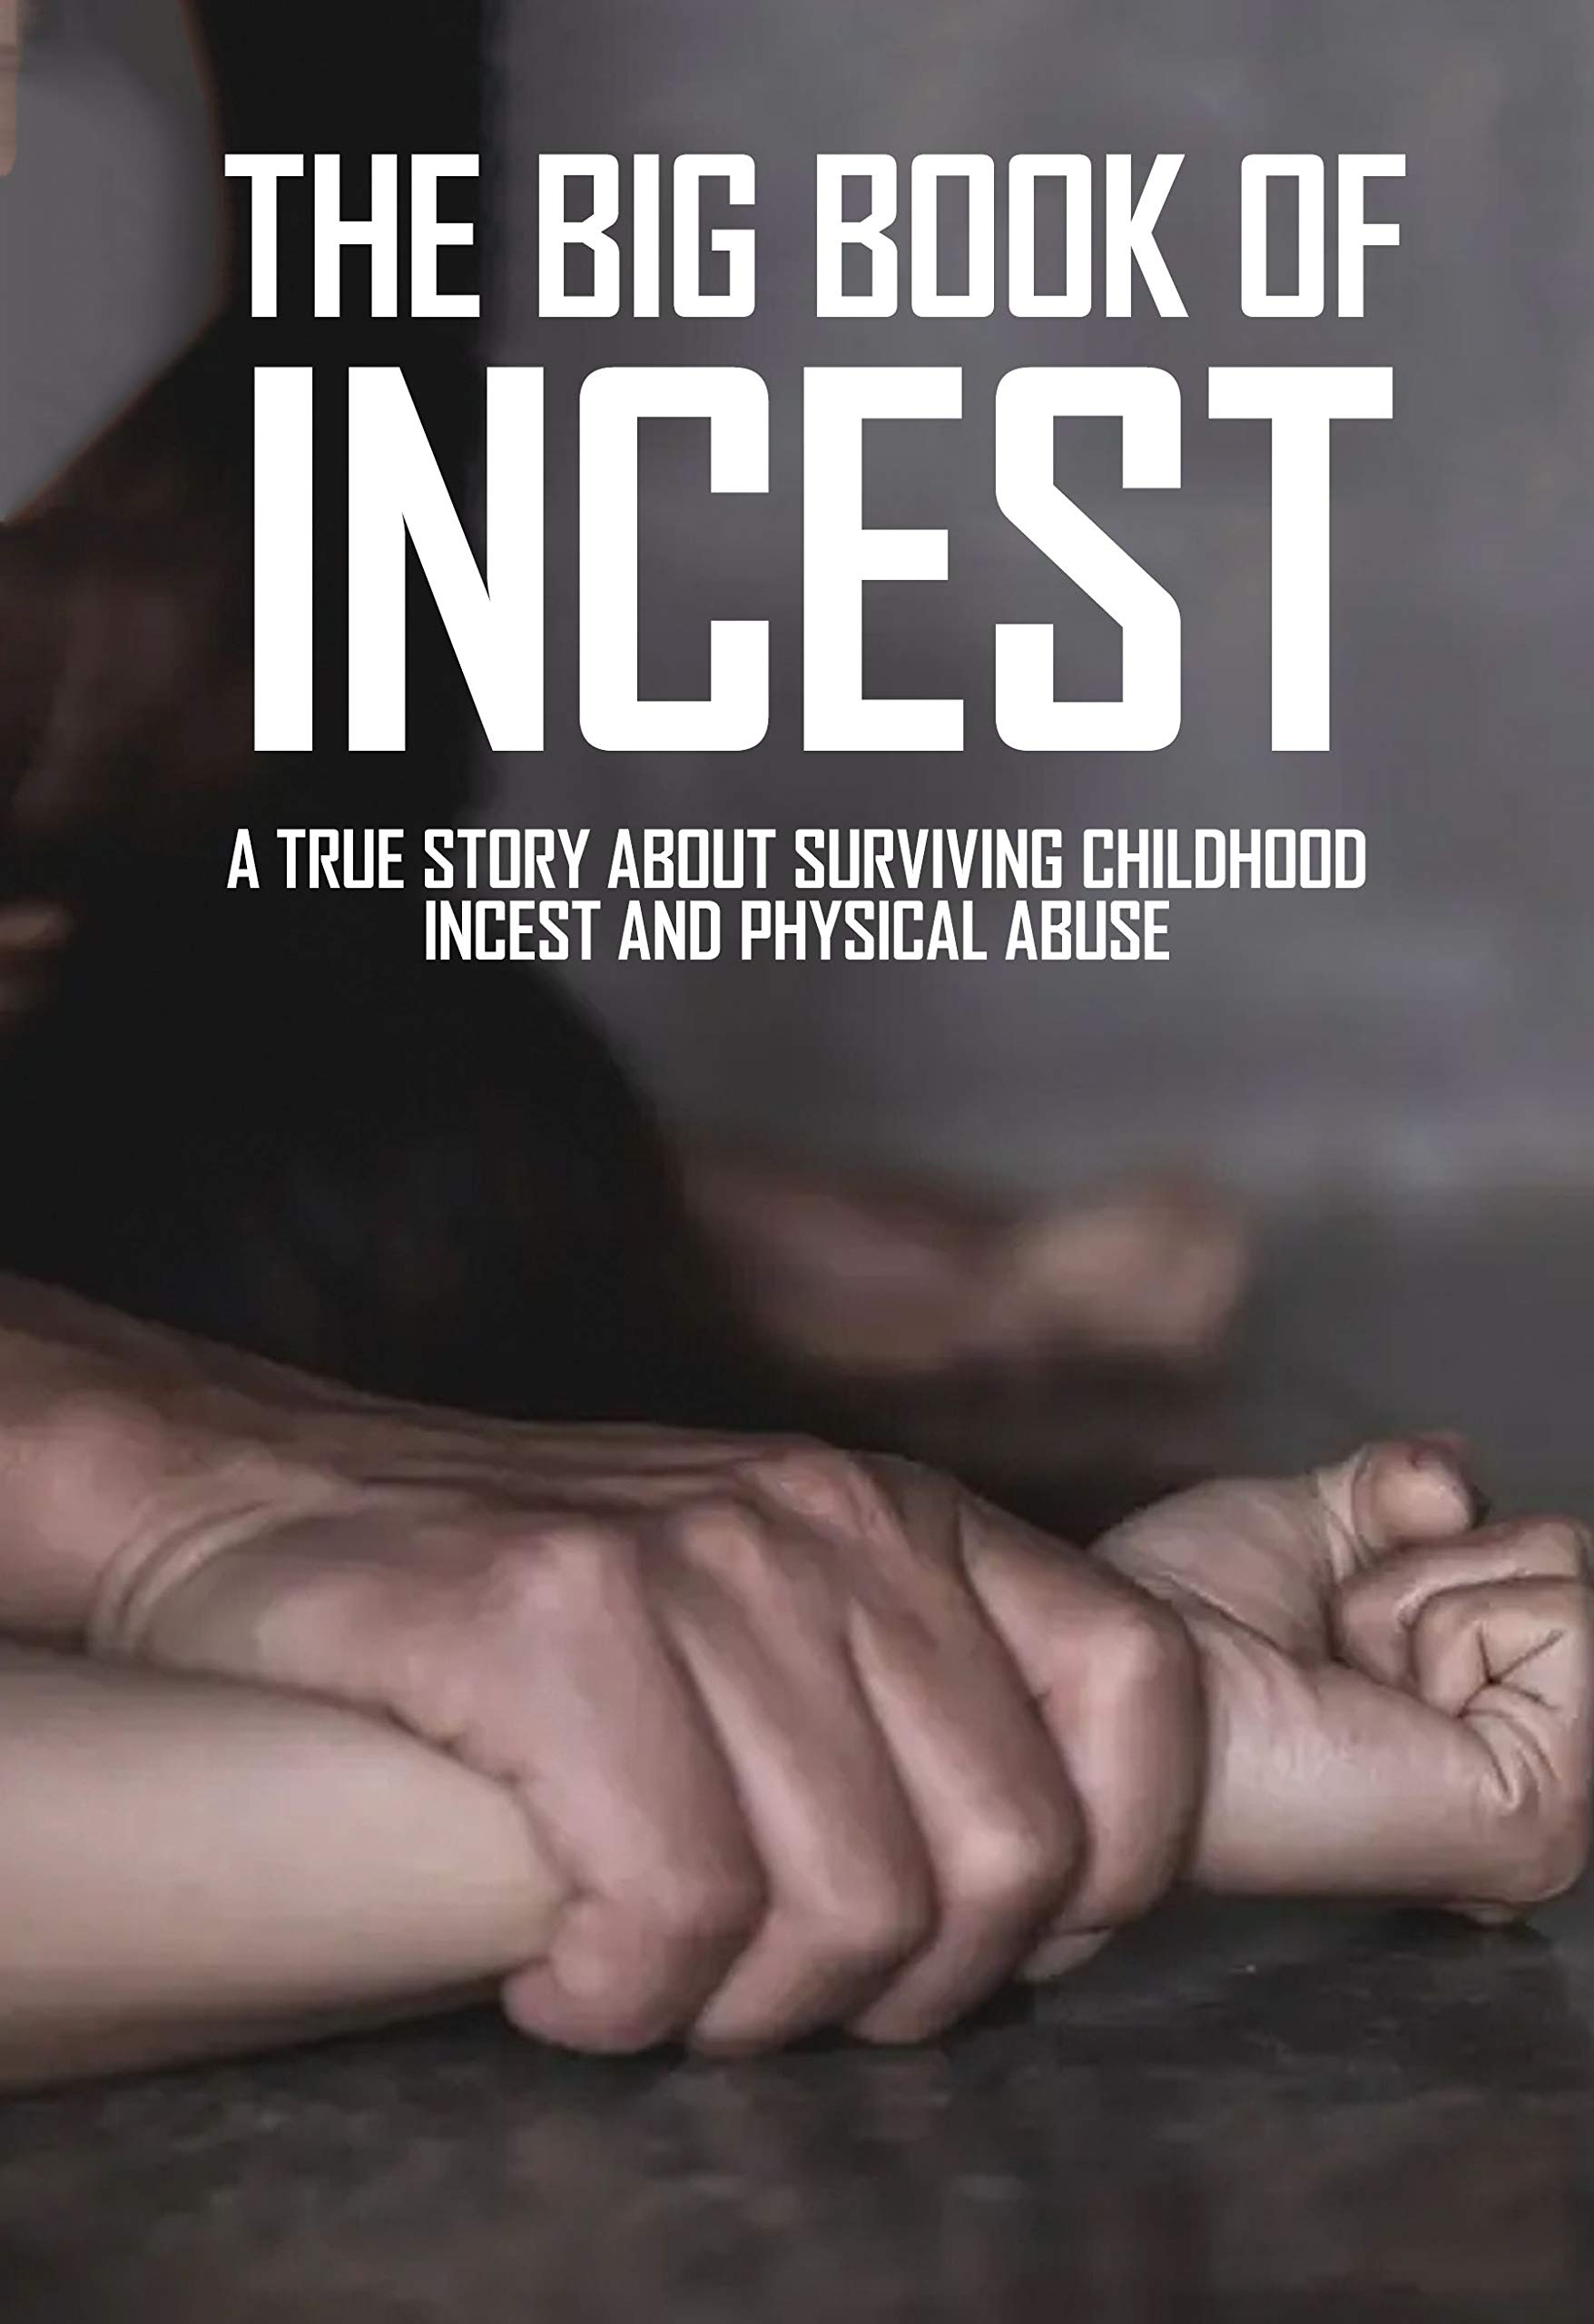 adrienne weeks recommends Real Stories Of Incest